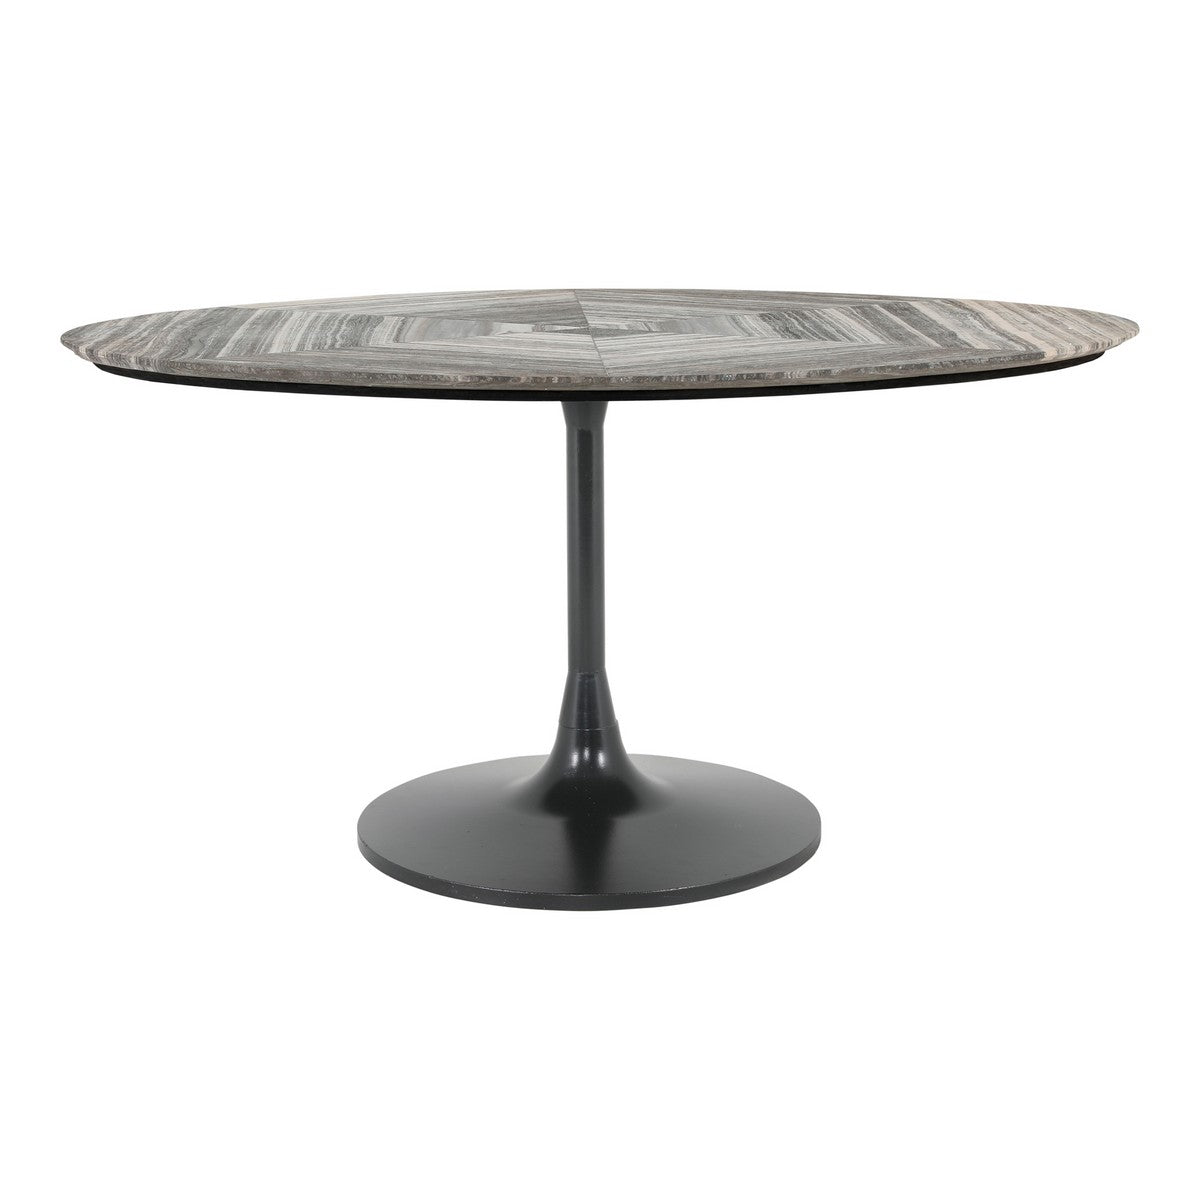 Moe's Home Collection Nyles Oval Marble Dining Table - GK-1114-37 - Moe's Home Collection - Dining Tables - Minimal And Modern - 1